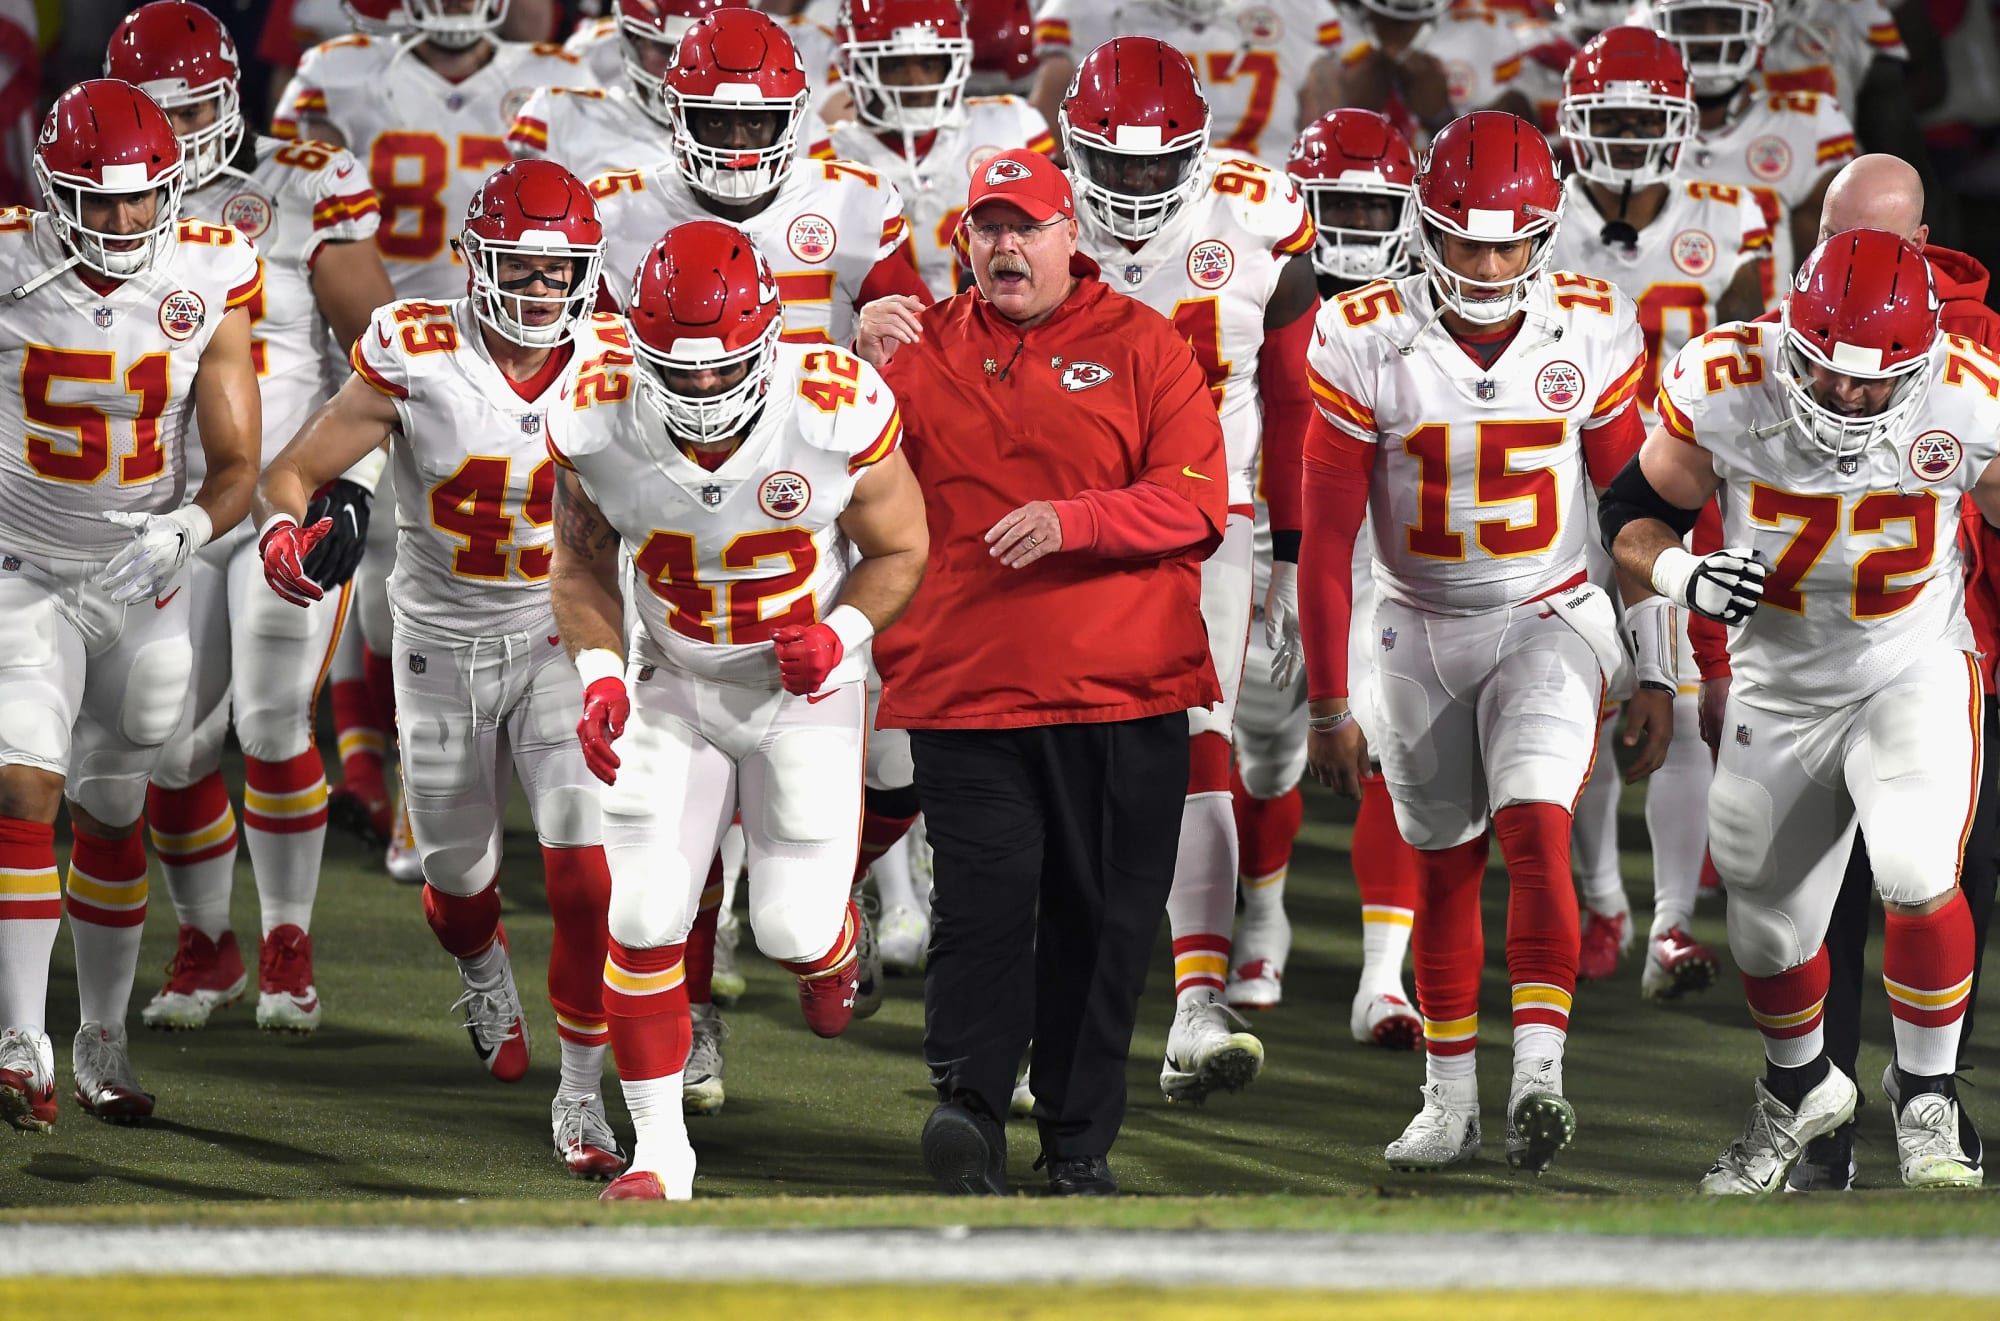 Kansas City Chiefs have not suffered blowout loss in three years